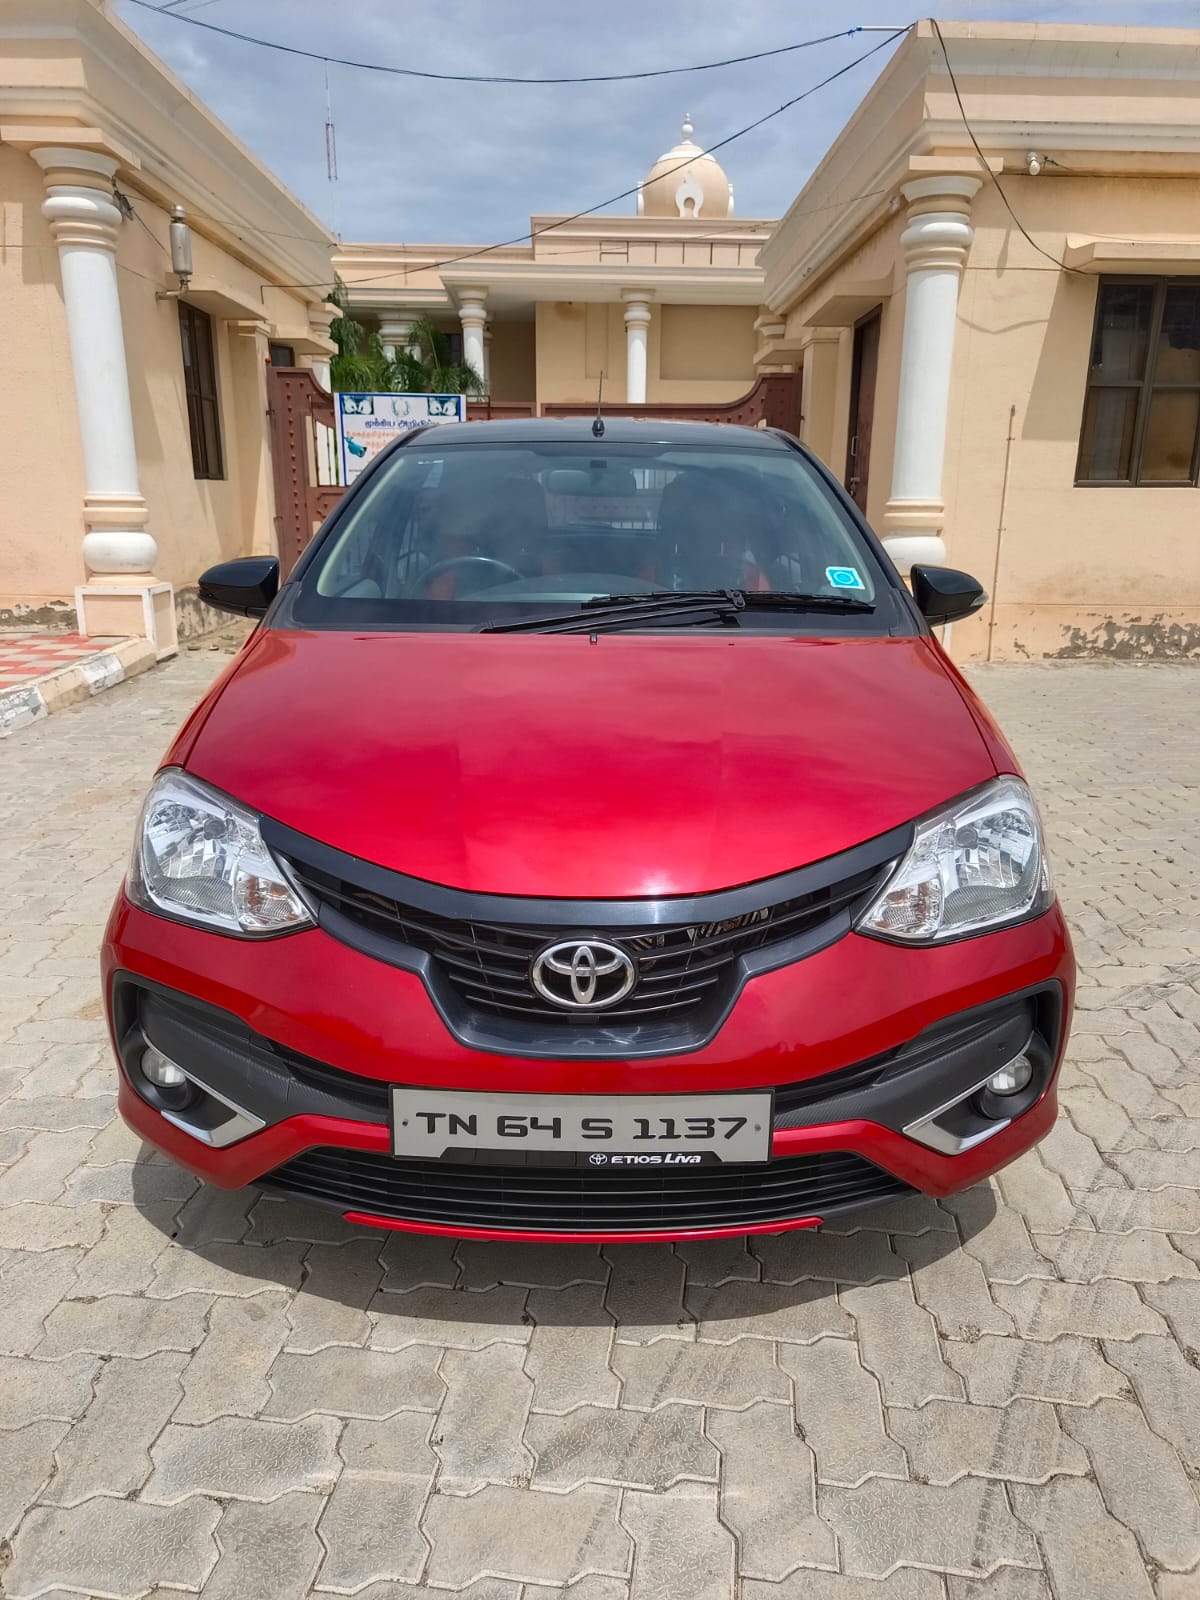 3751-for-sale-Toyota-Etios-Liva-Diesel-First-Owner-2018-TN-registered-rs-650000